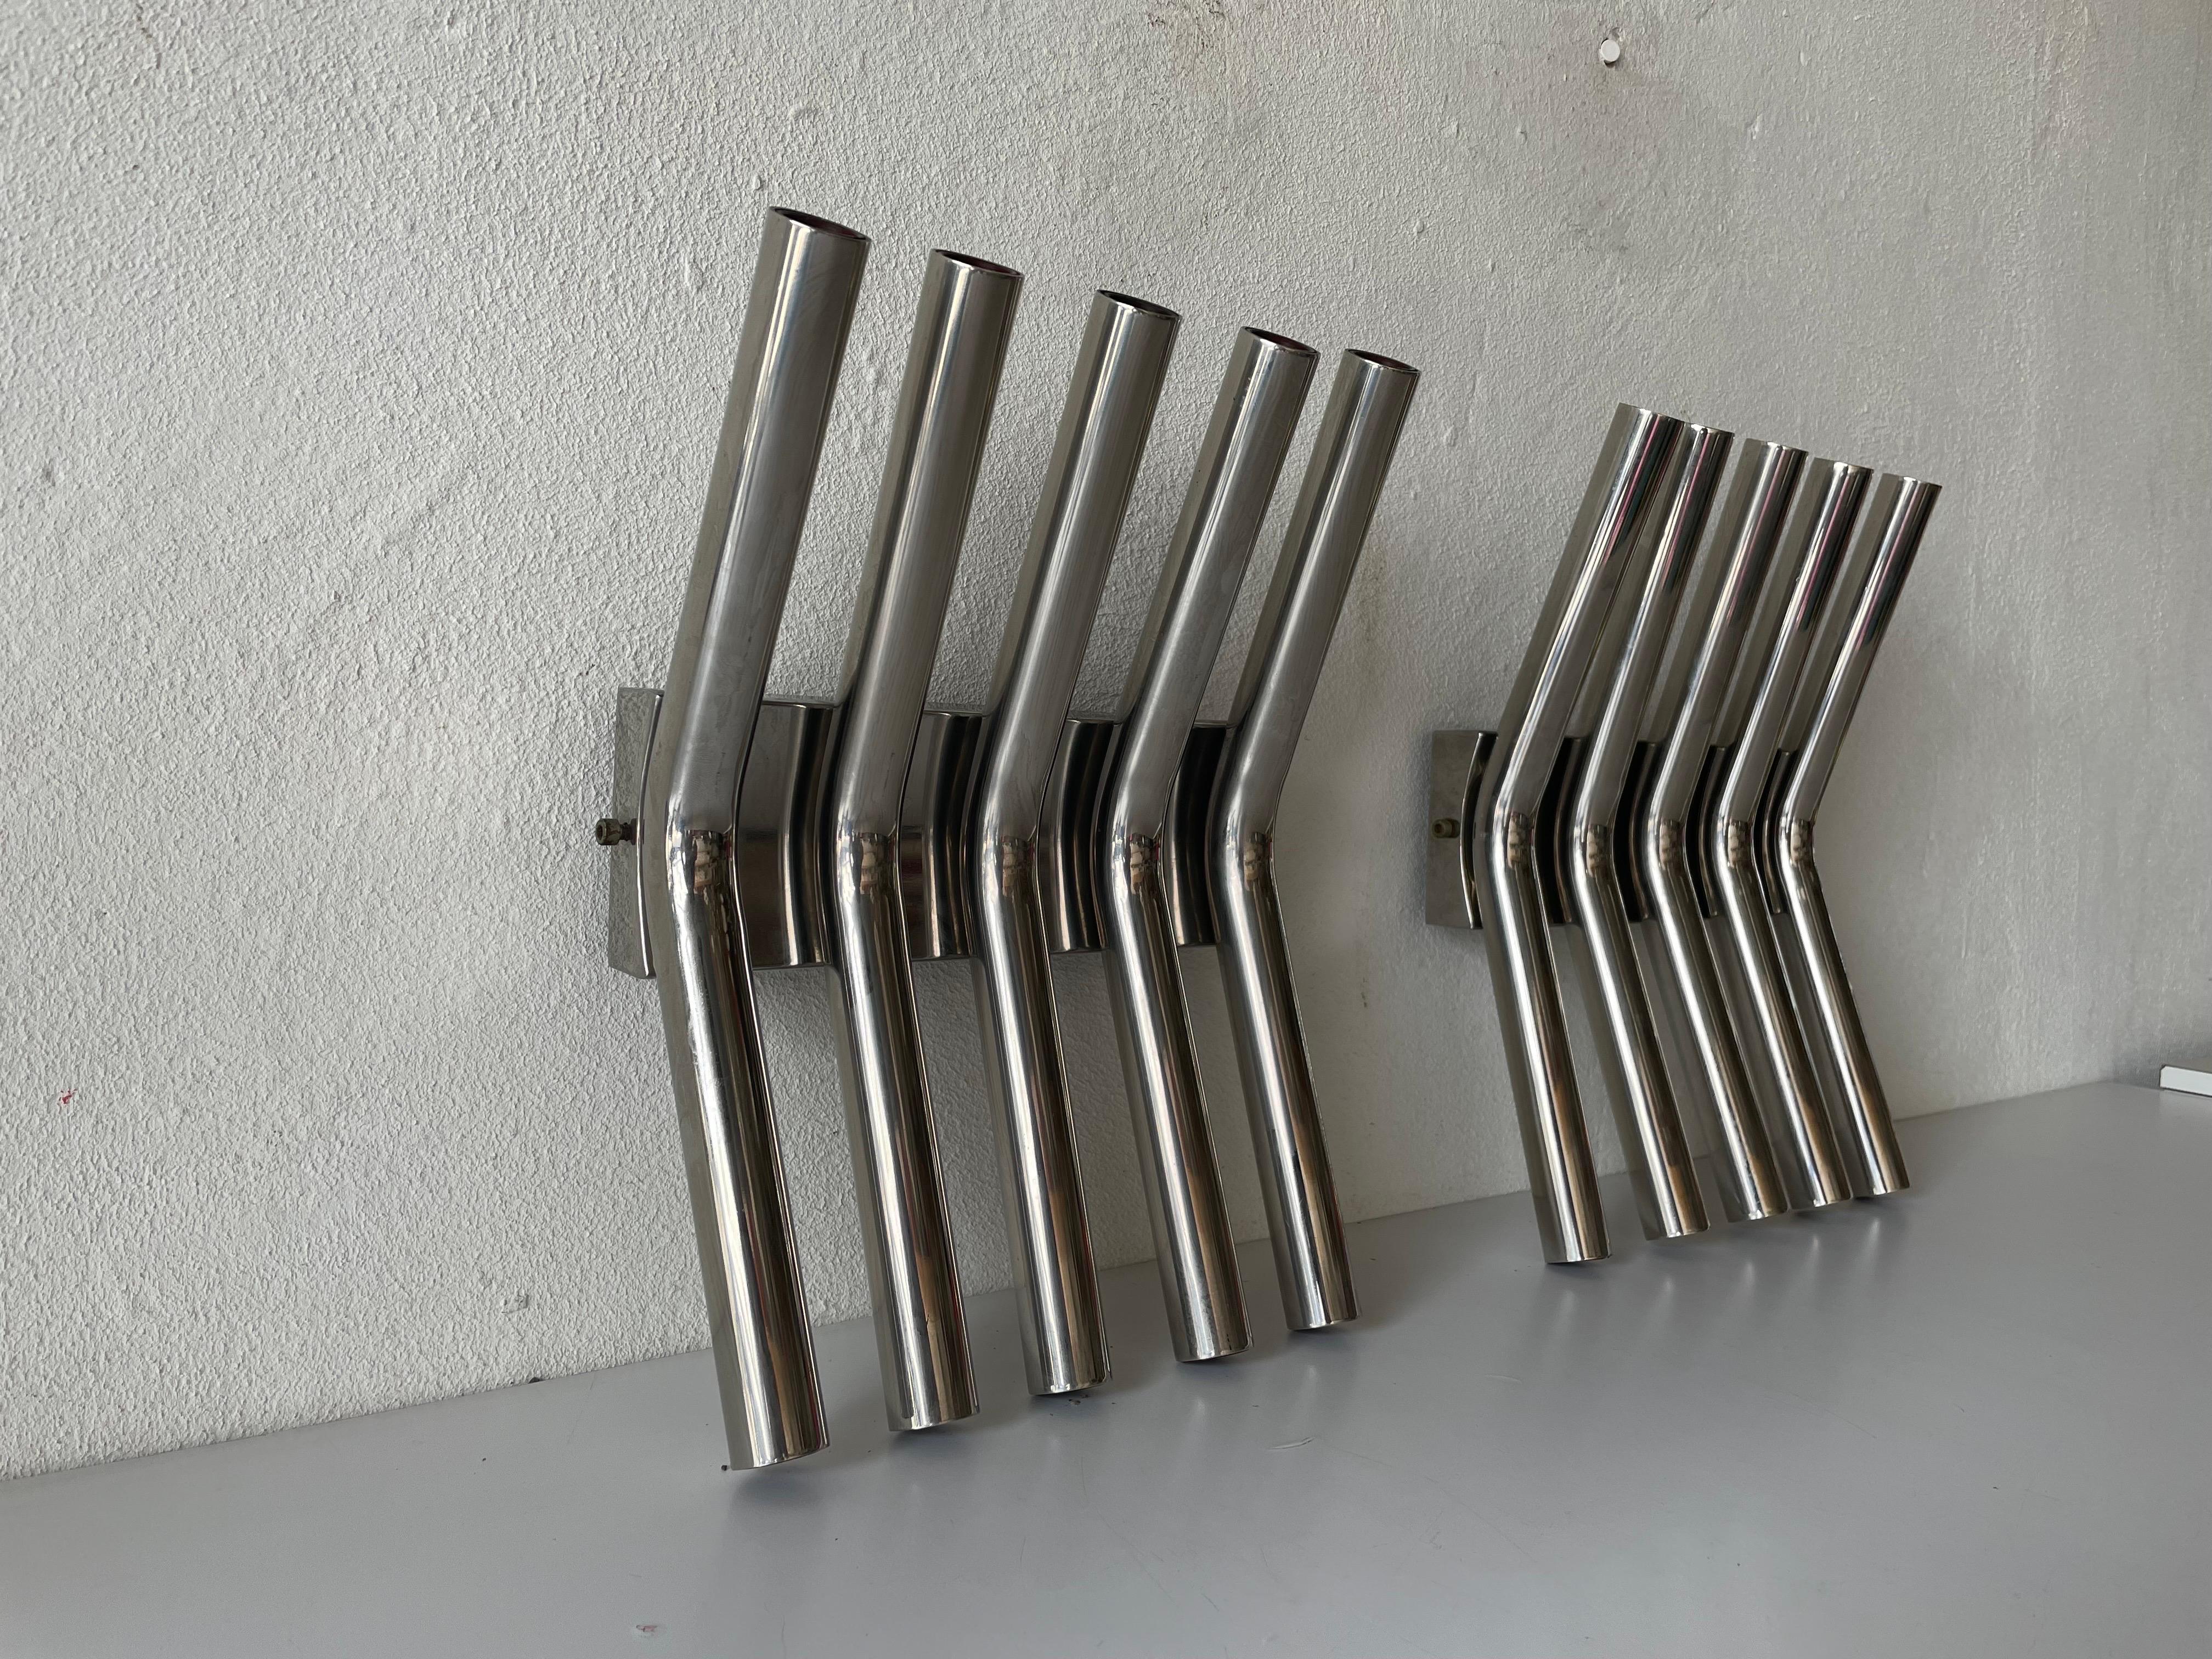 Mid-Century Modern 5-armed Tubes Design Pair of Chrome Italian Sconces by Reggiani, 1960s Italy For Sale